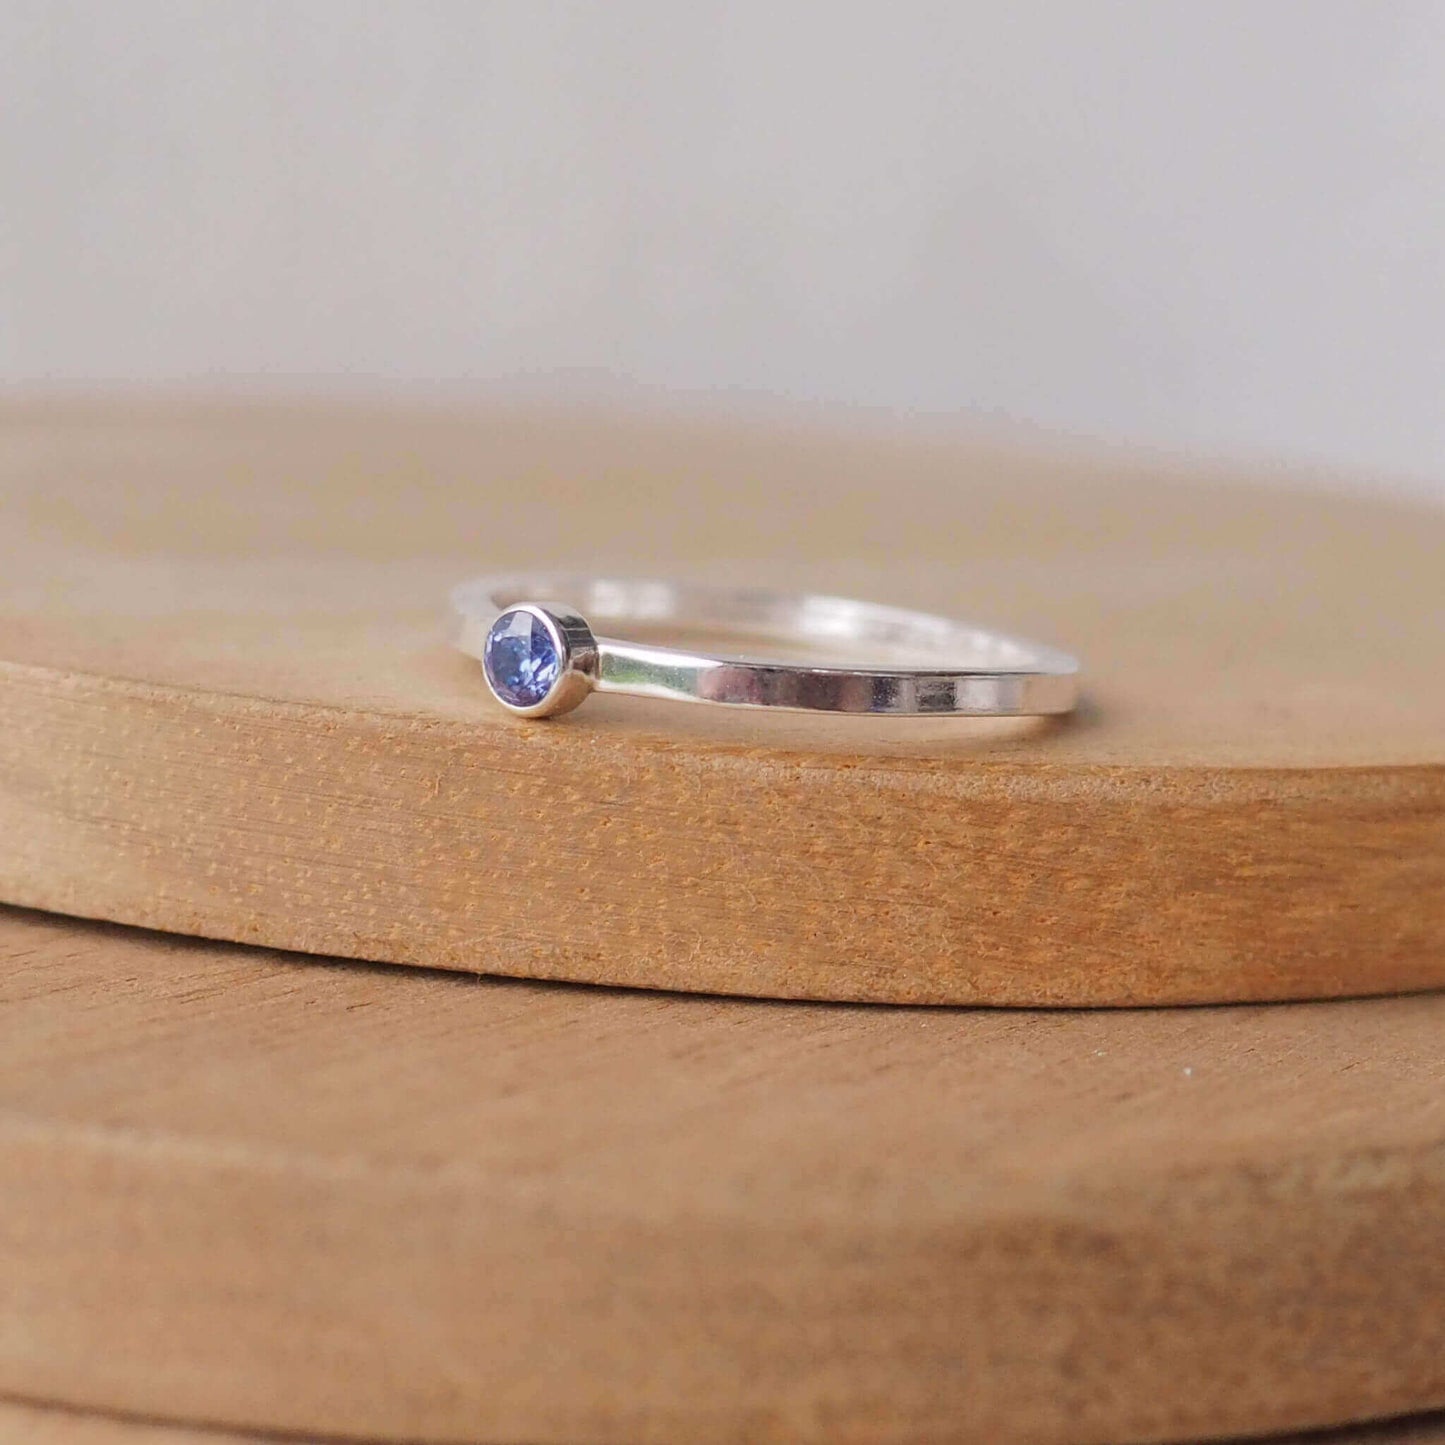 Simple Solitaire ring with a man made tanzanite gemstone. The ring is made from Sterling Silver and a round violet cubic zirconia measuring 3mm in size. It is sent onto a modern ring with a square profile. The ring is handmade by maram jewellery in Scotland